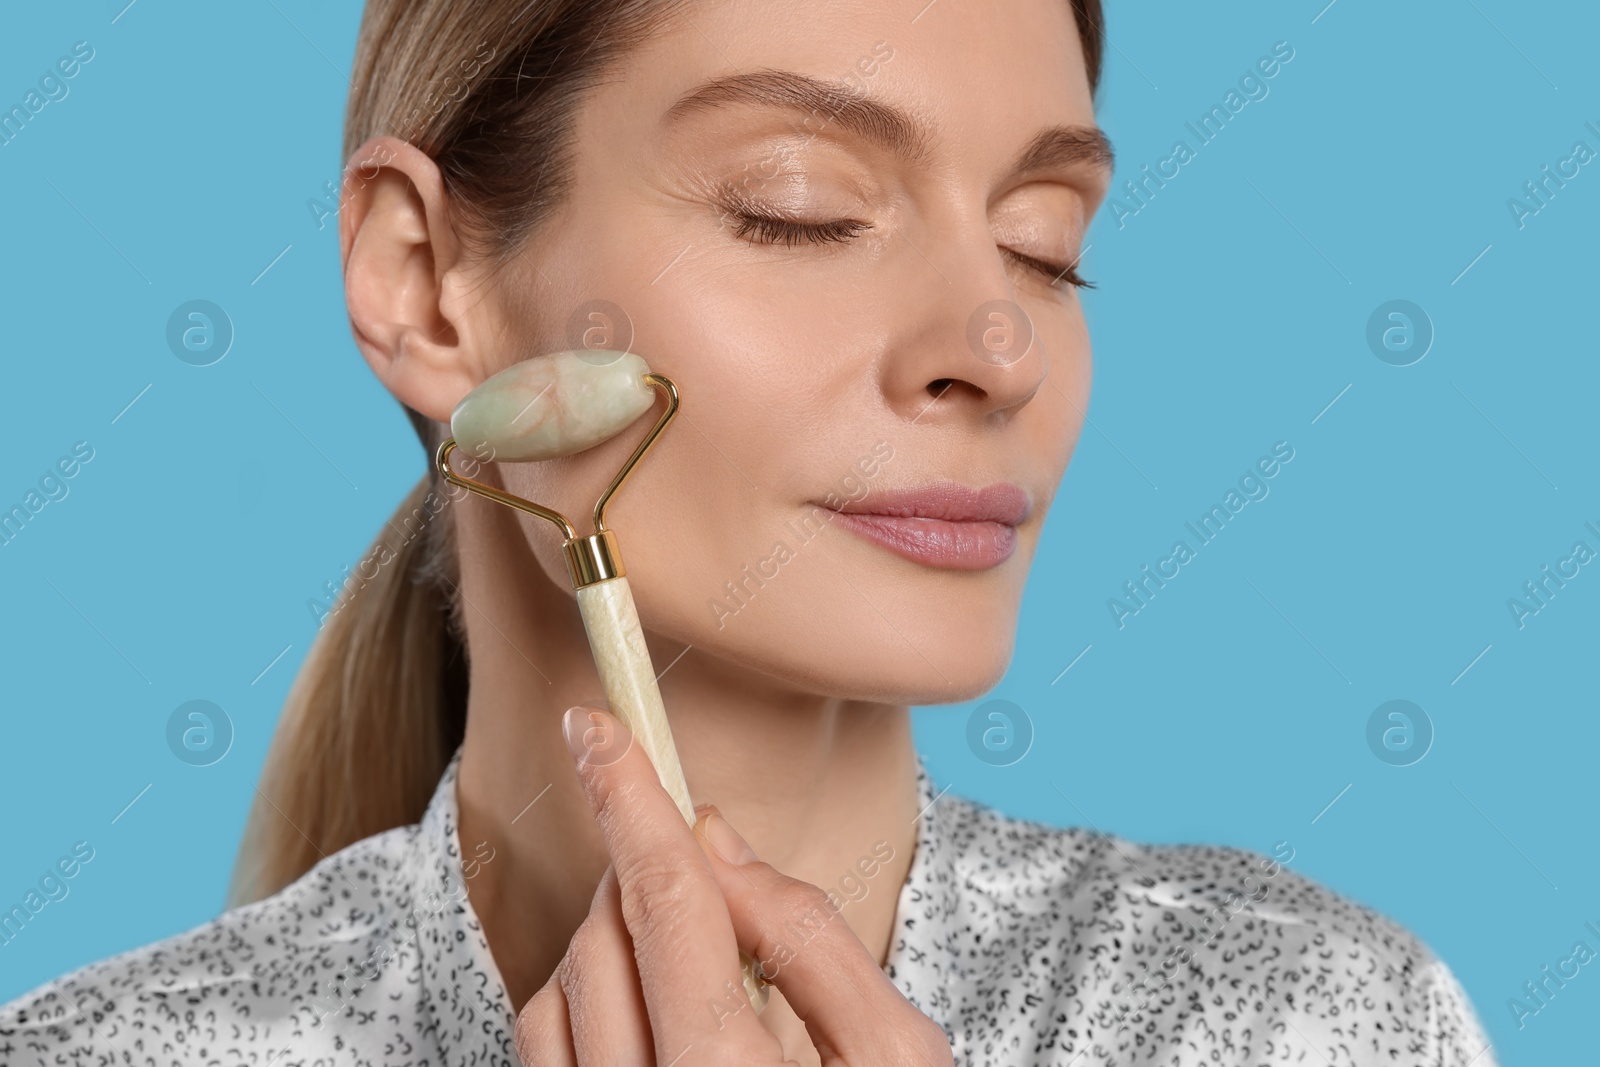 Photo of Woman massaging her face with jade roller on turquoise background